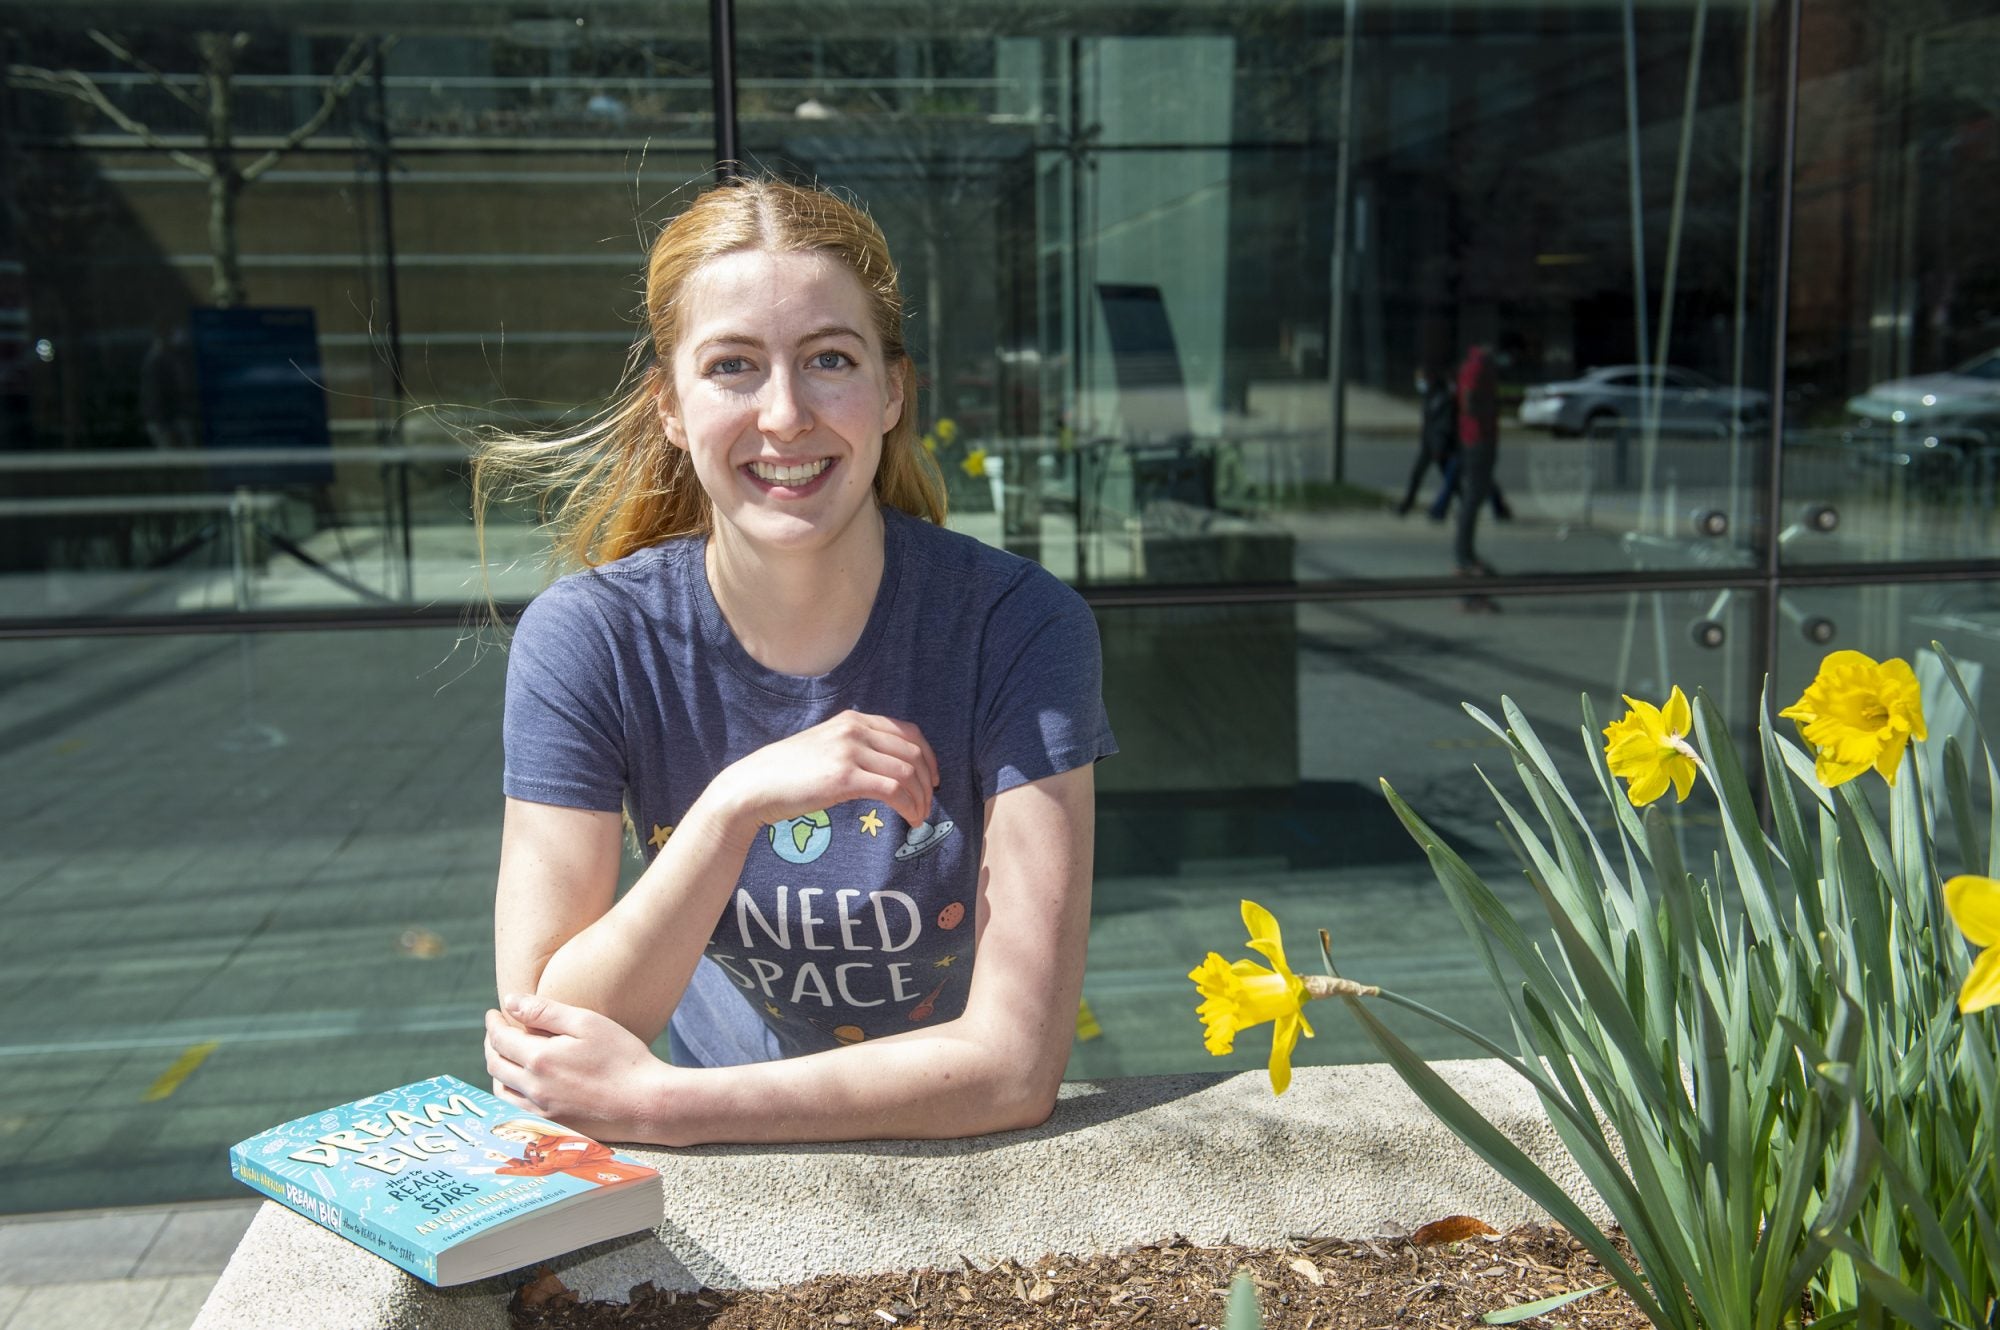 A woman sits outside beside flowers with a book "Dream Big" in front of her